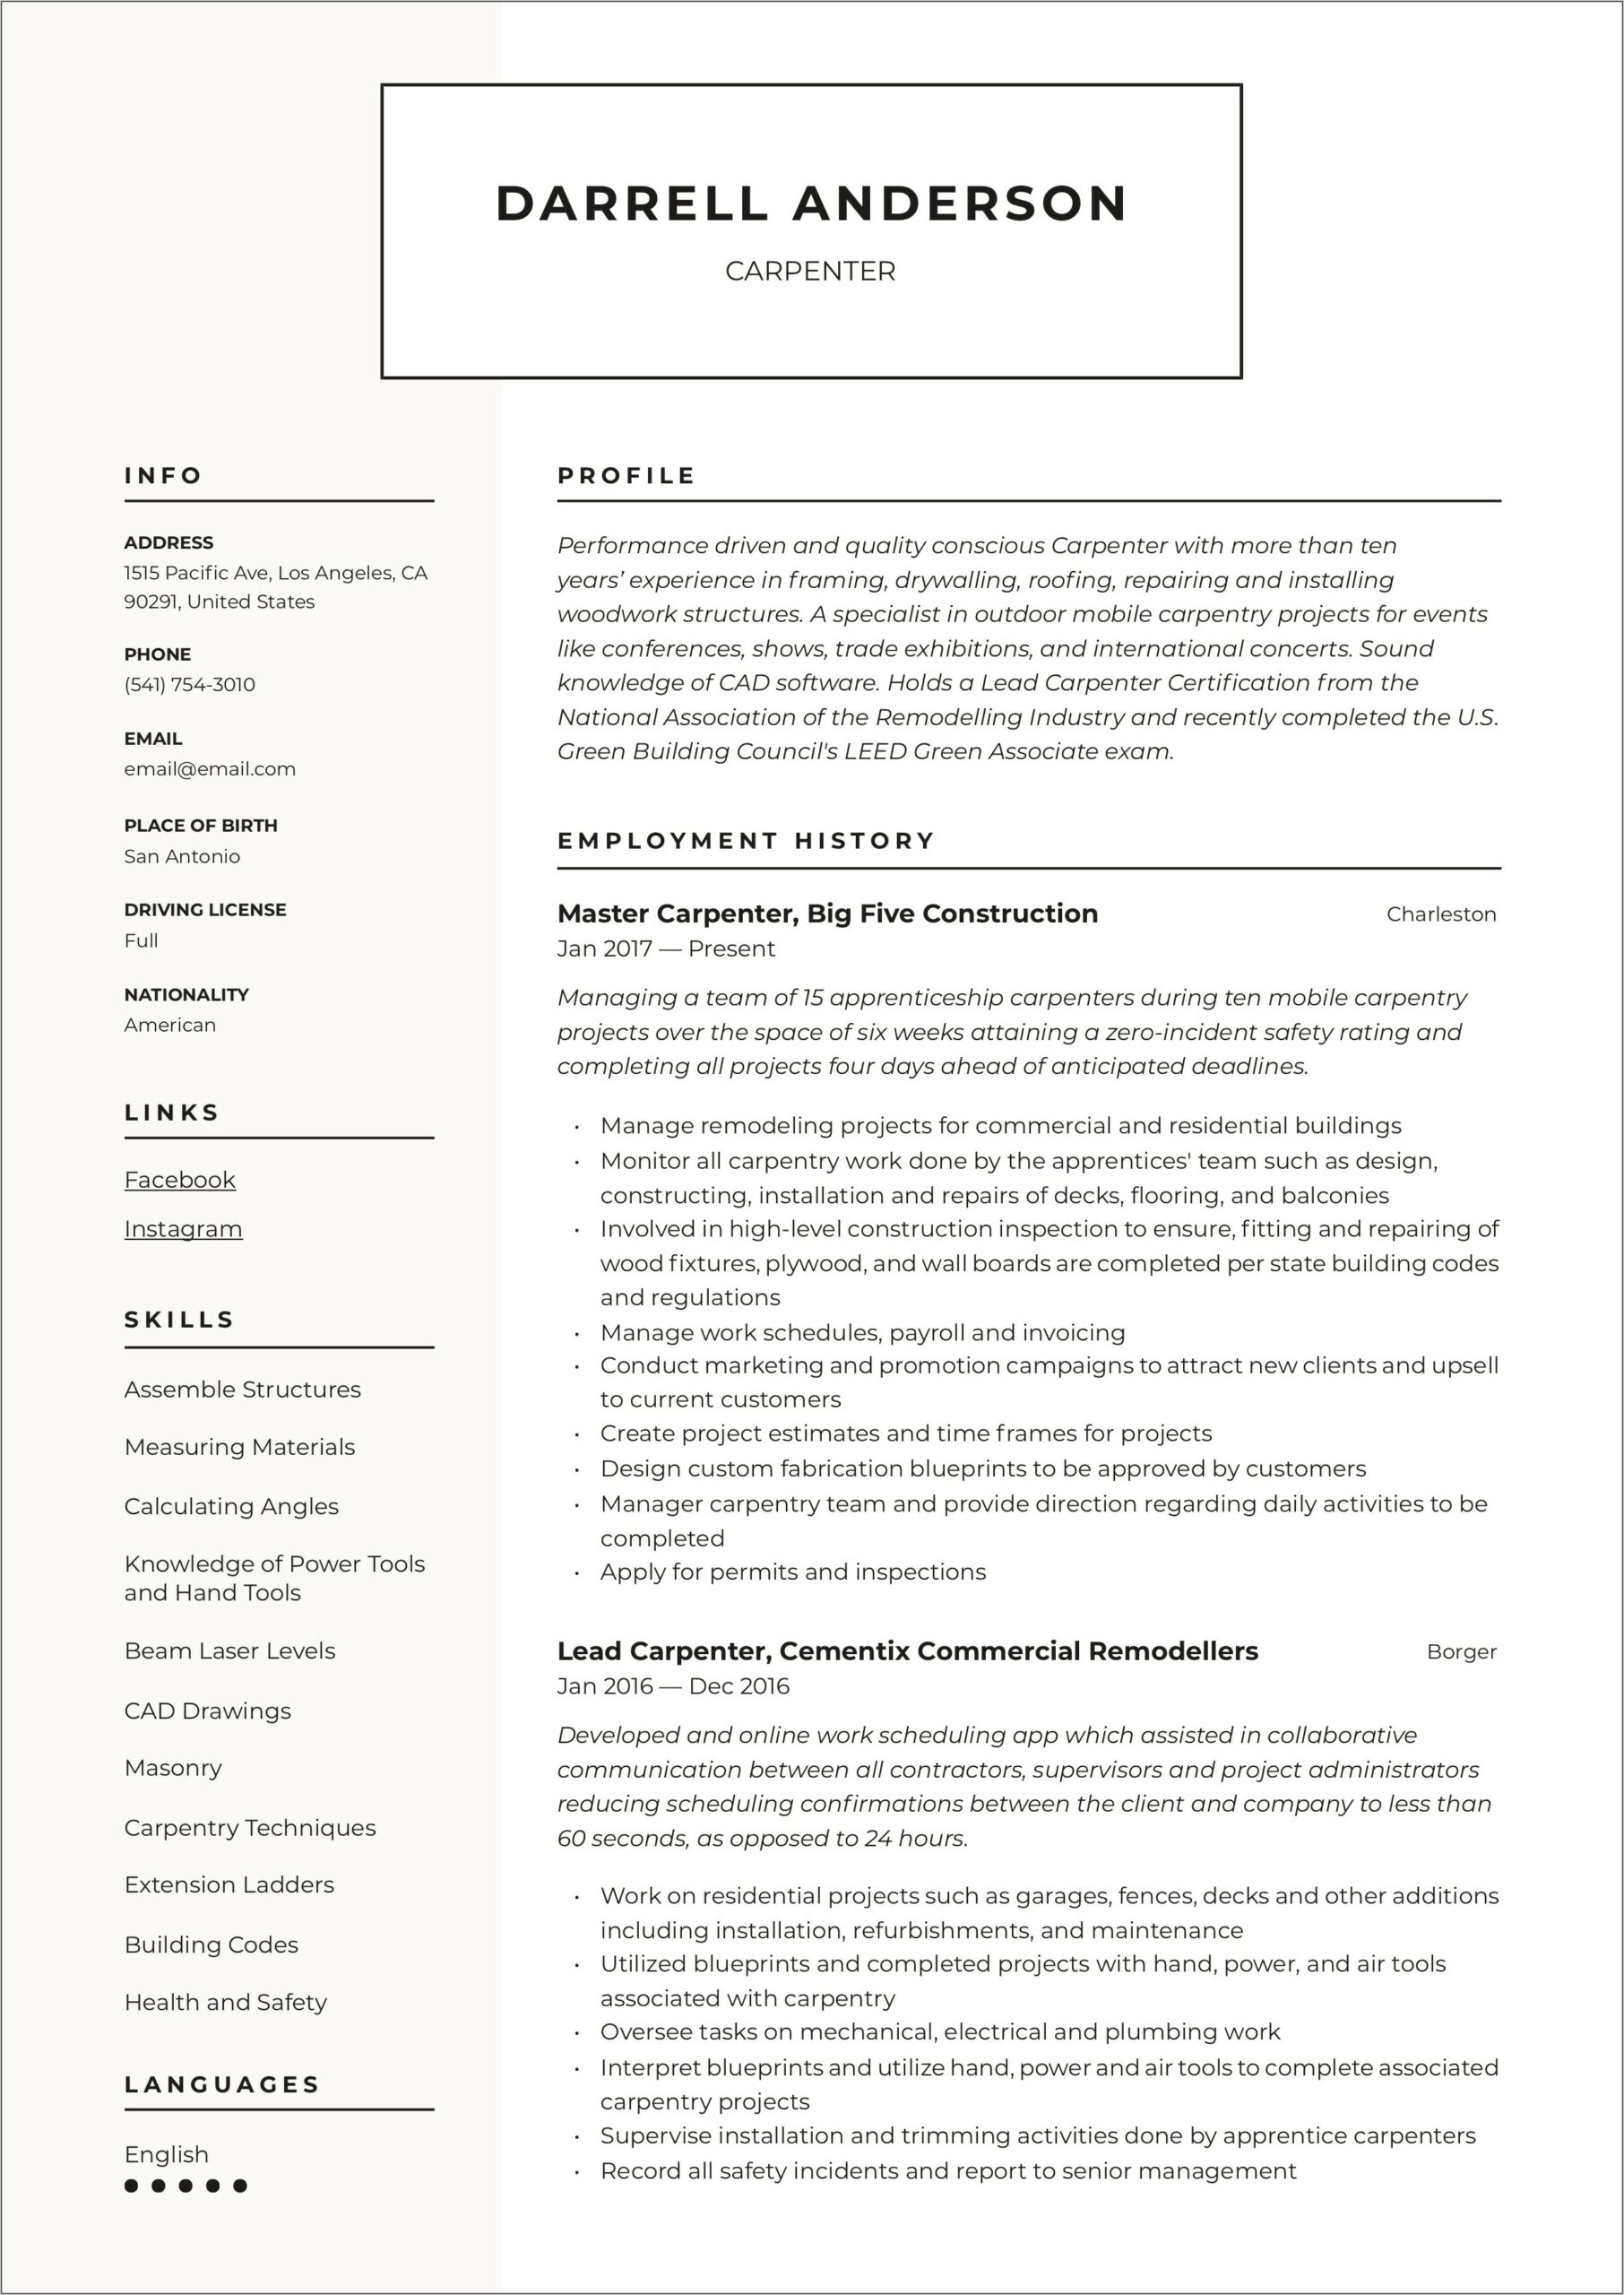 Independent Carpentry Contractor Resume Sample